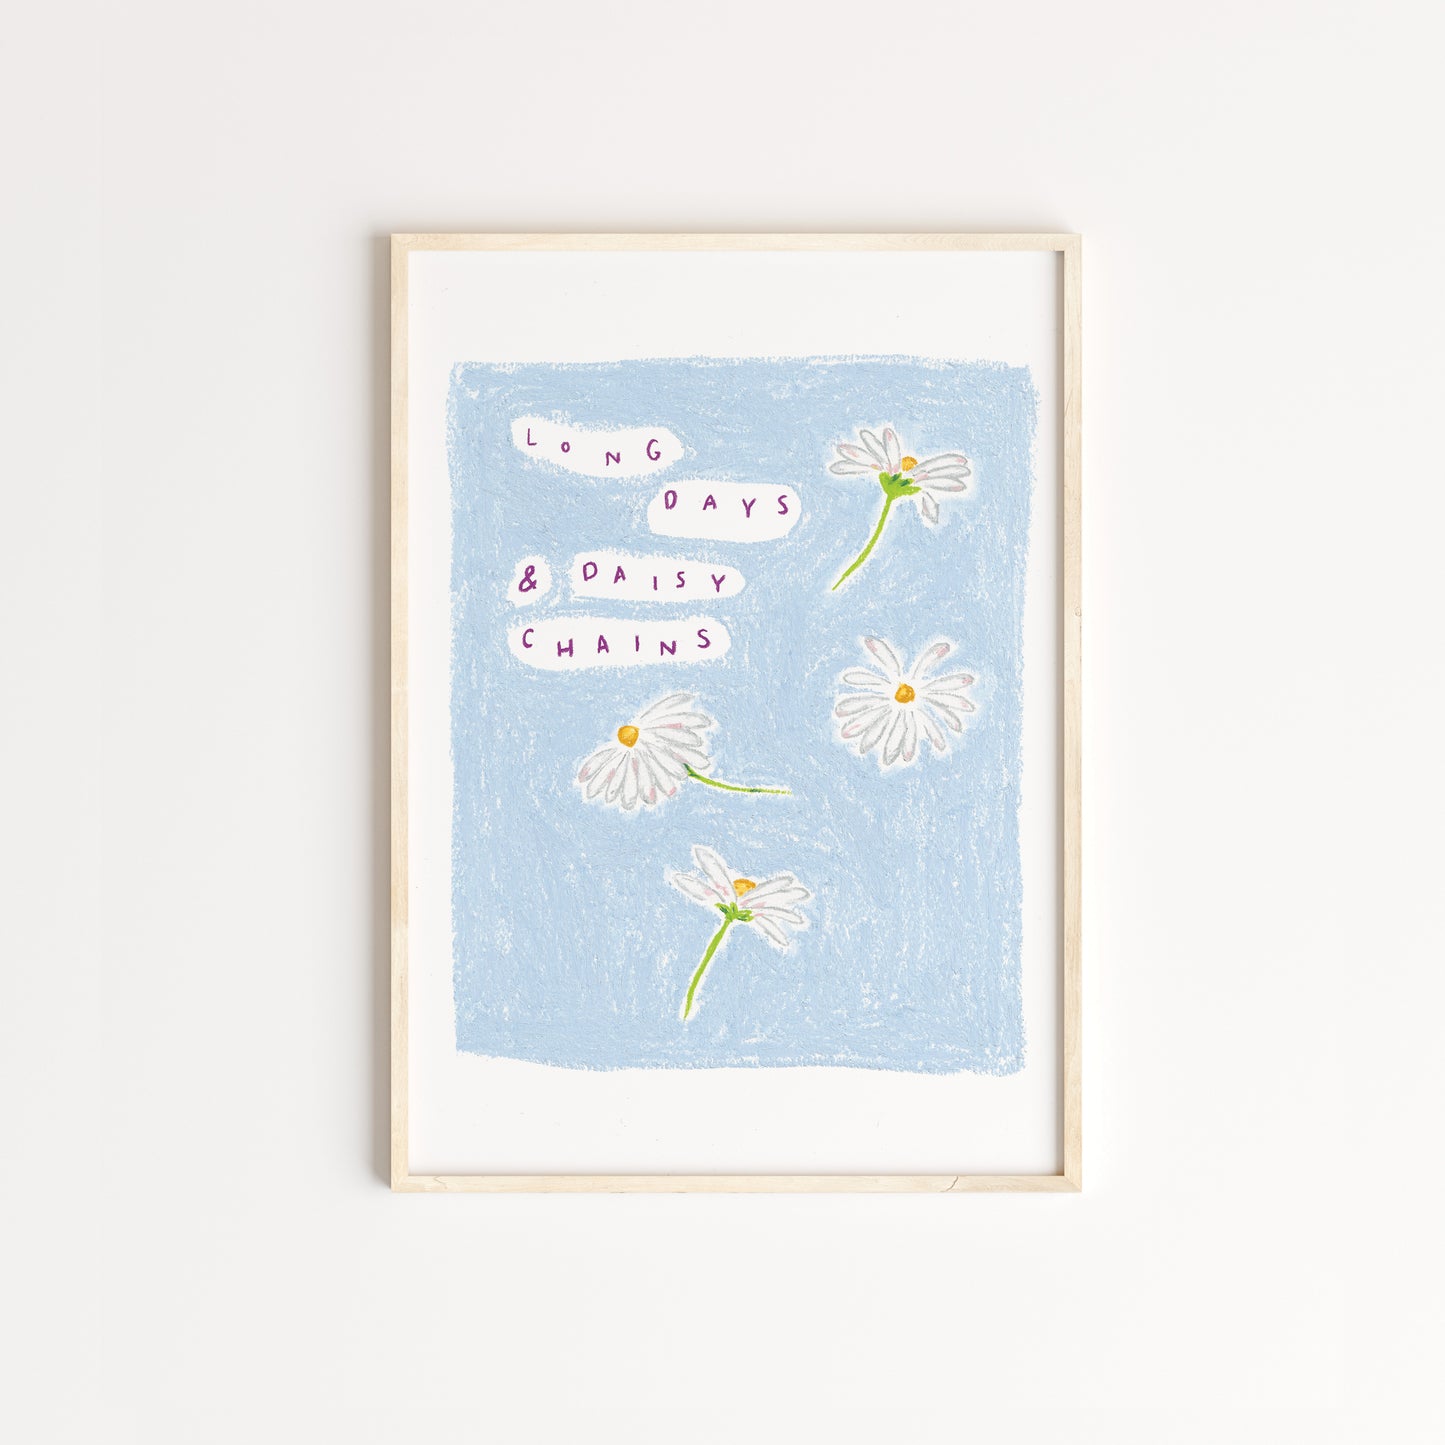 Hand-drawn print of white daises with dashes on pink in the details, the words 'long days and daisy chains' written on the left hand side, surrounded by a light blue background. Drawn with pastel pencils. Displayed in an oak frame.